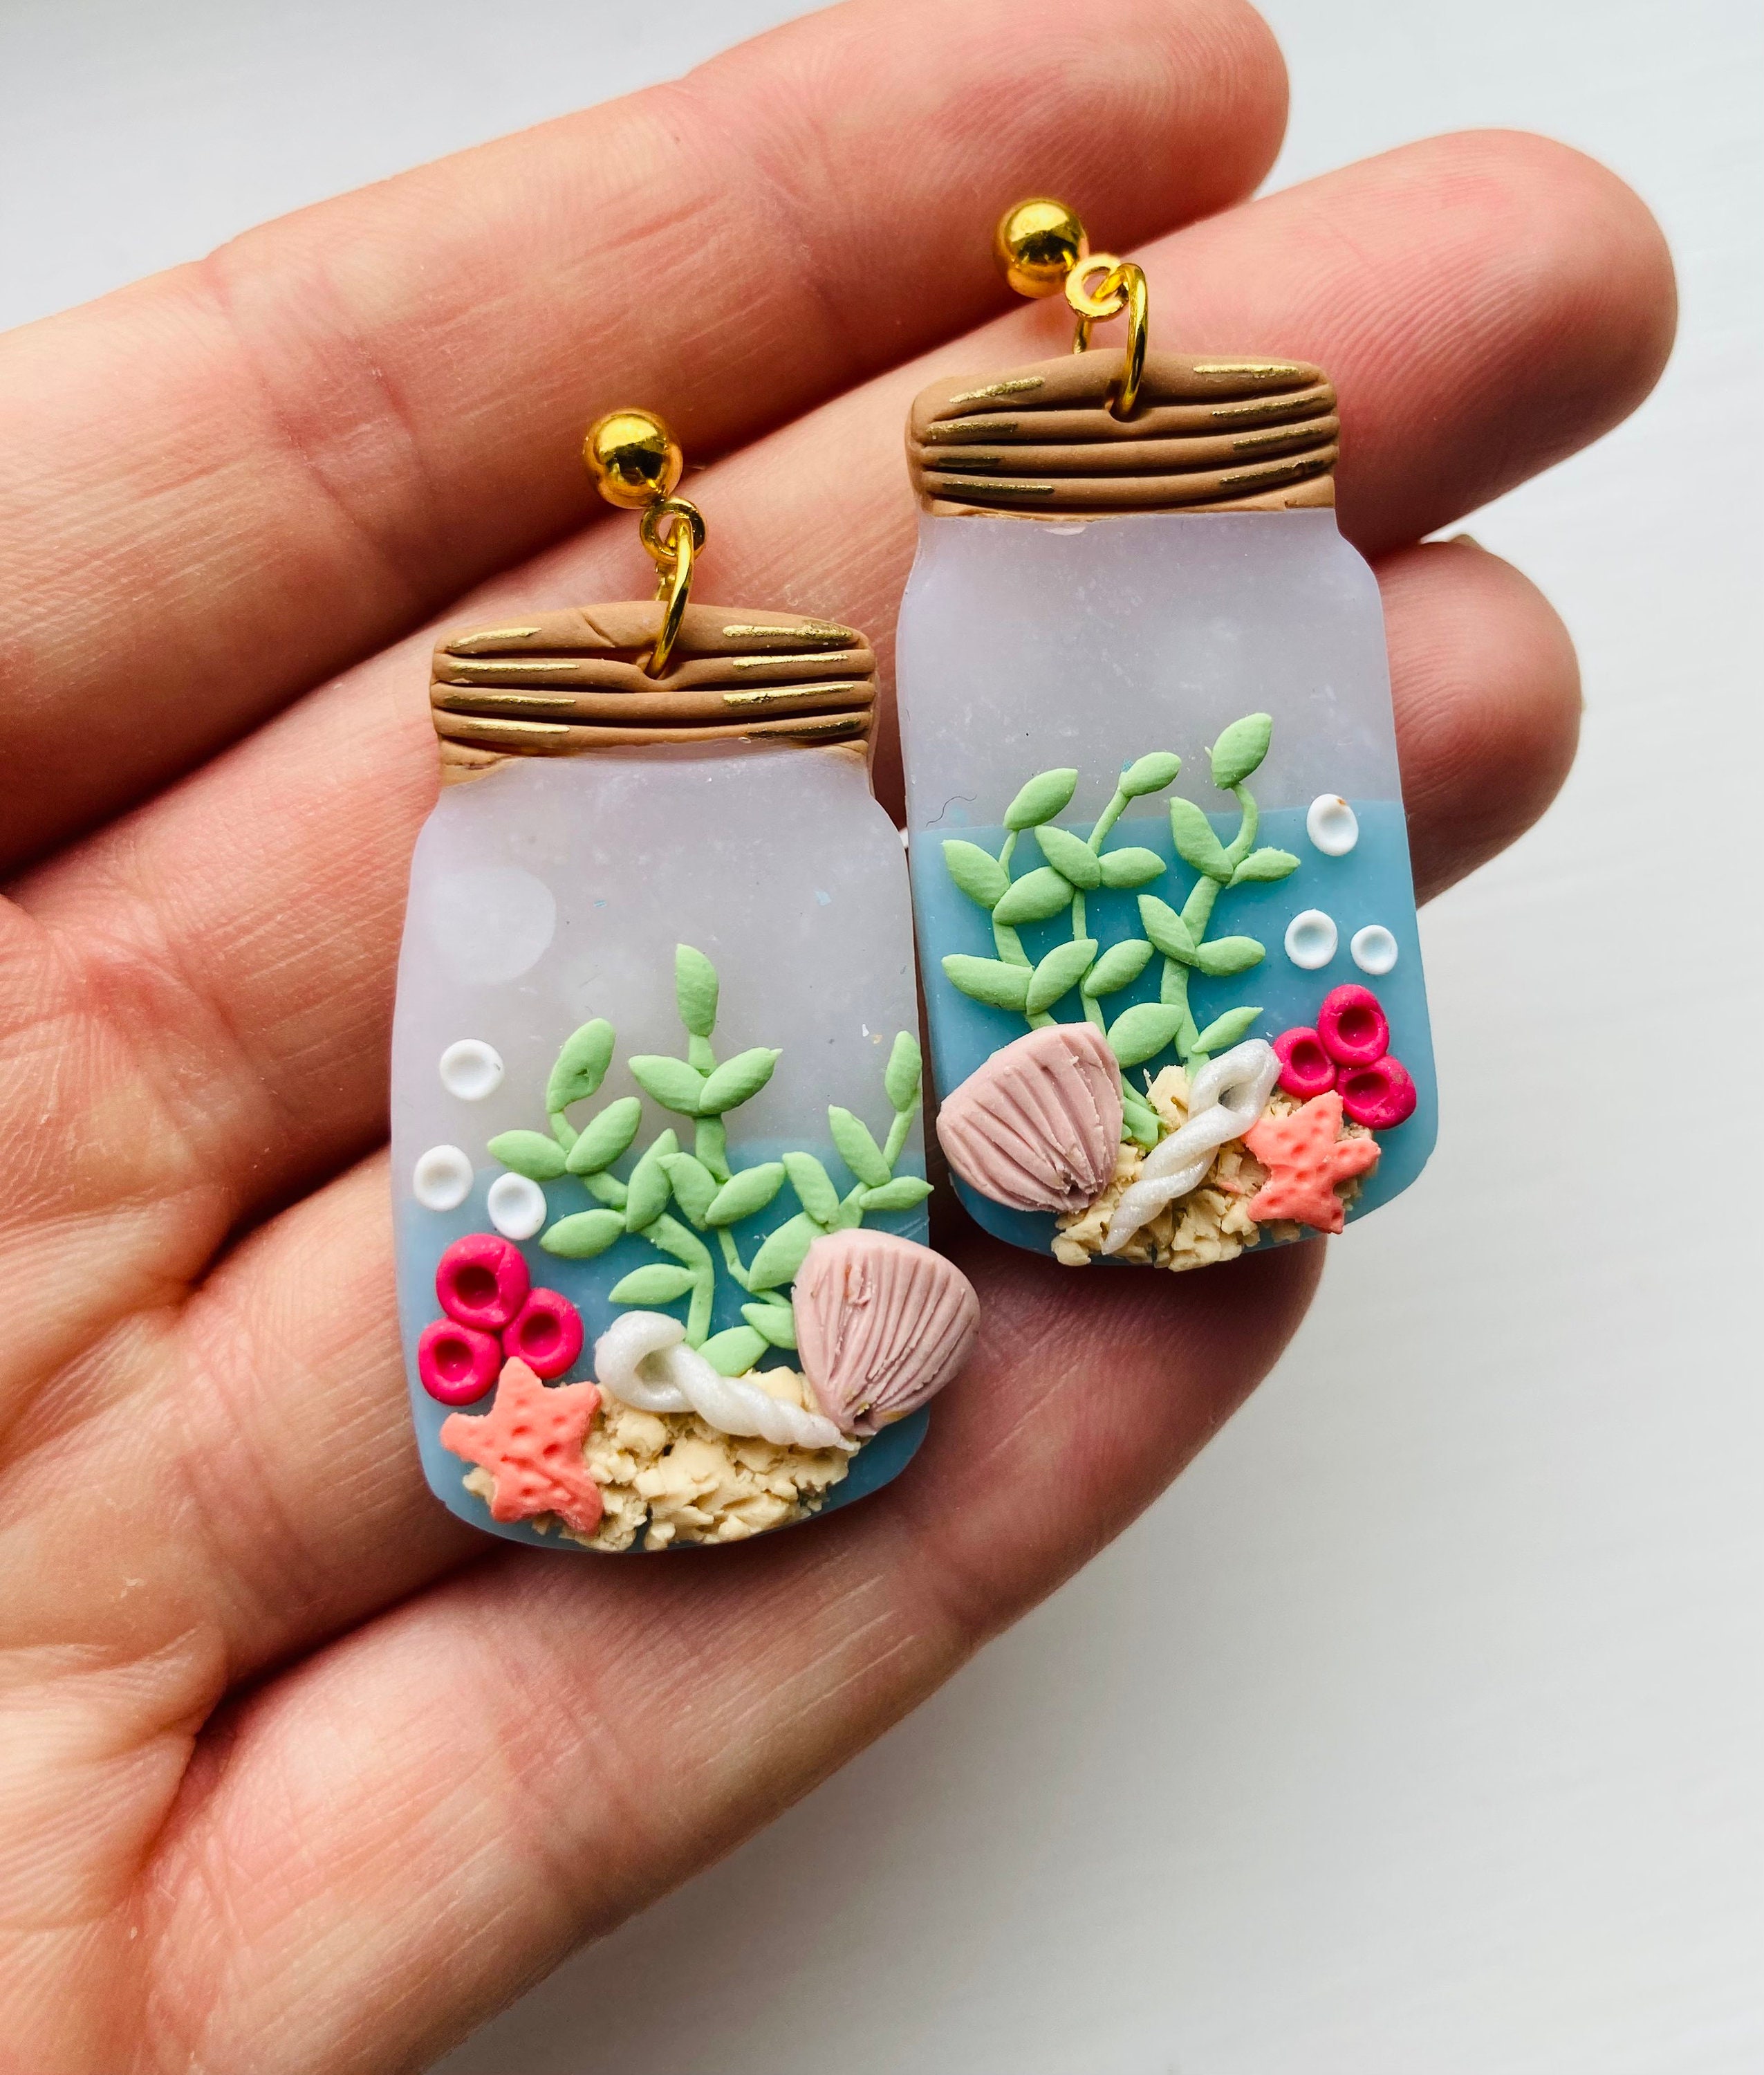 10 Best Polymer Clay Kits for Earrings and More, by Avery Smith